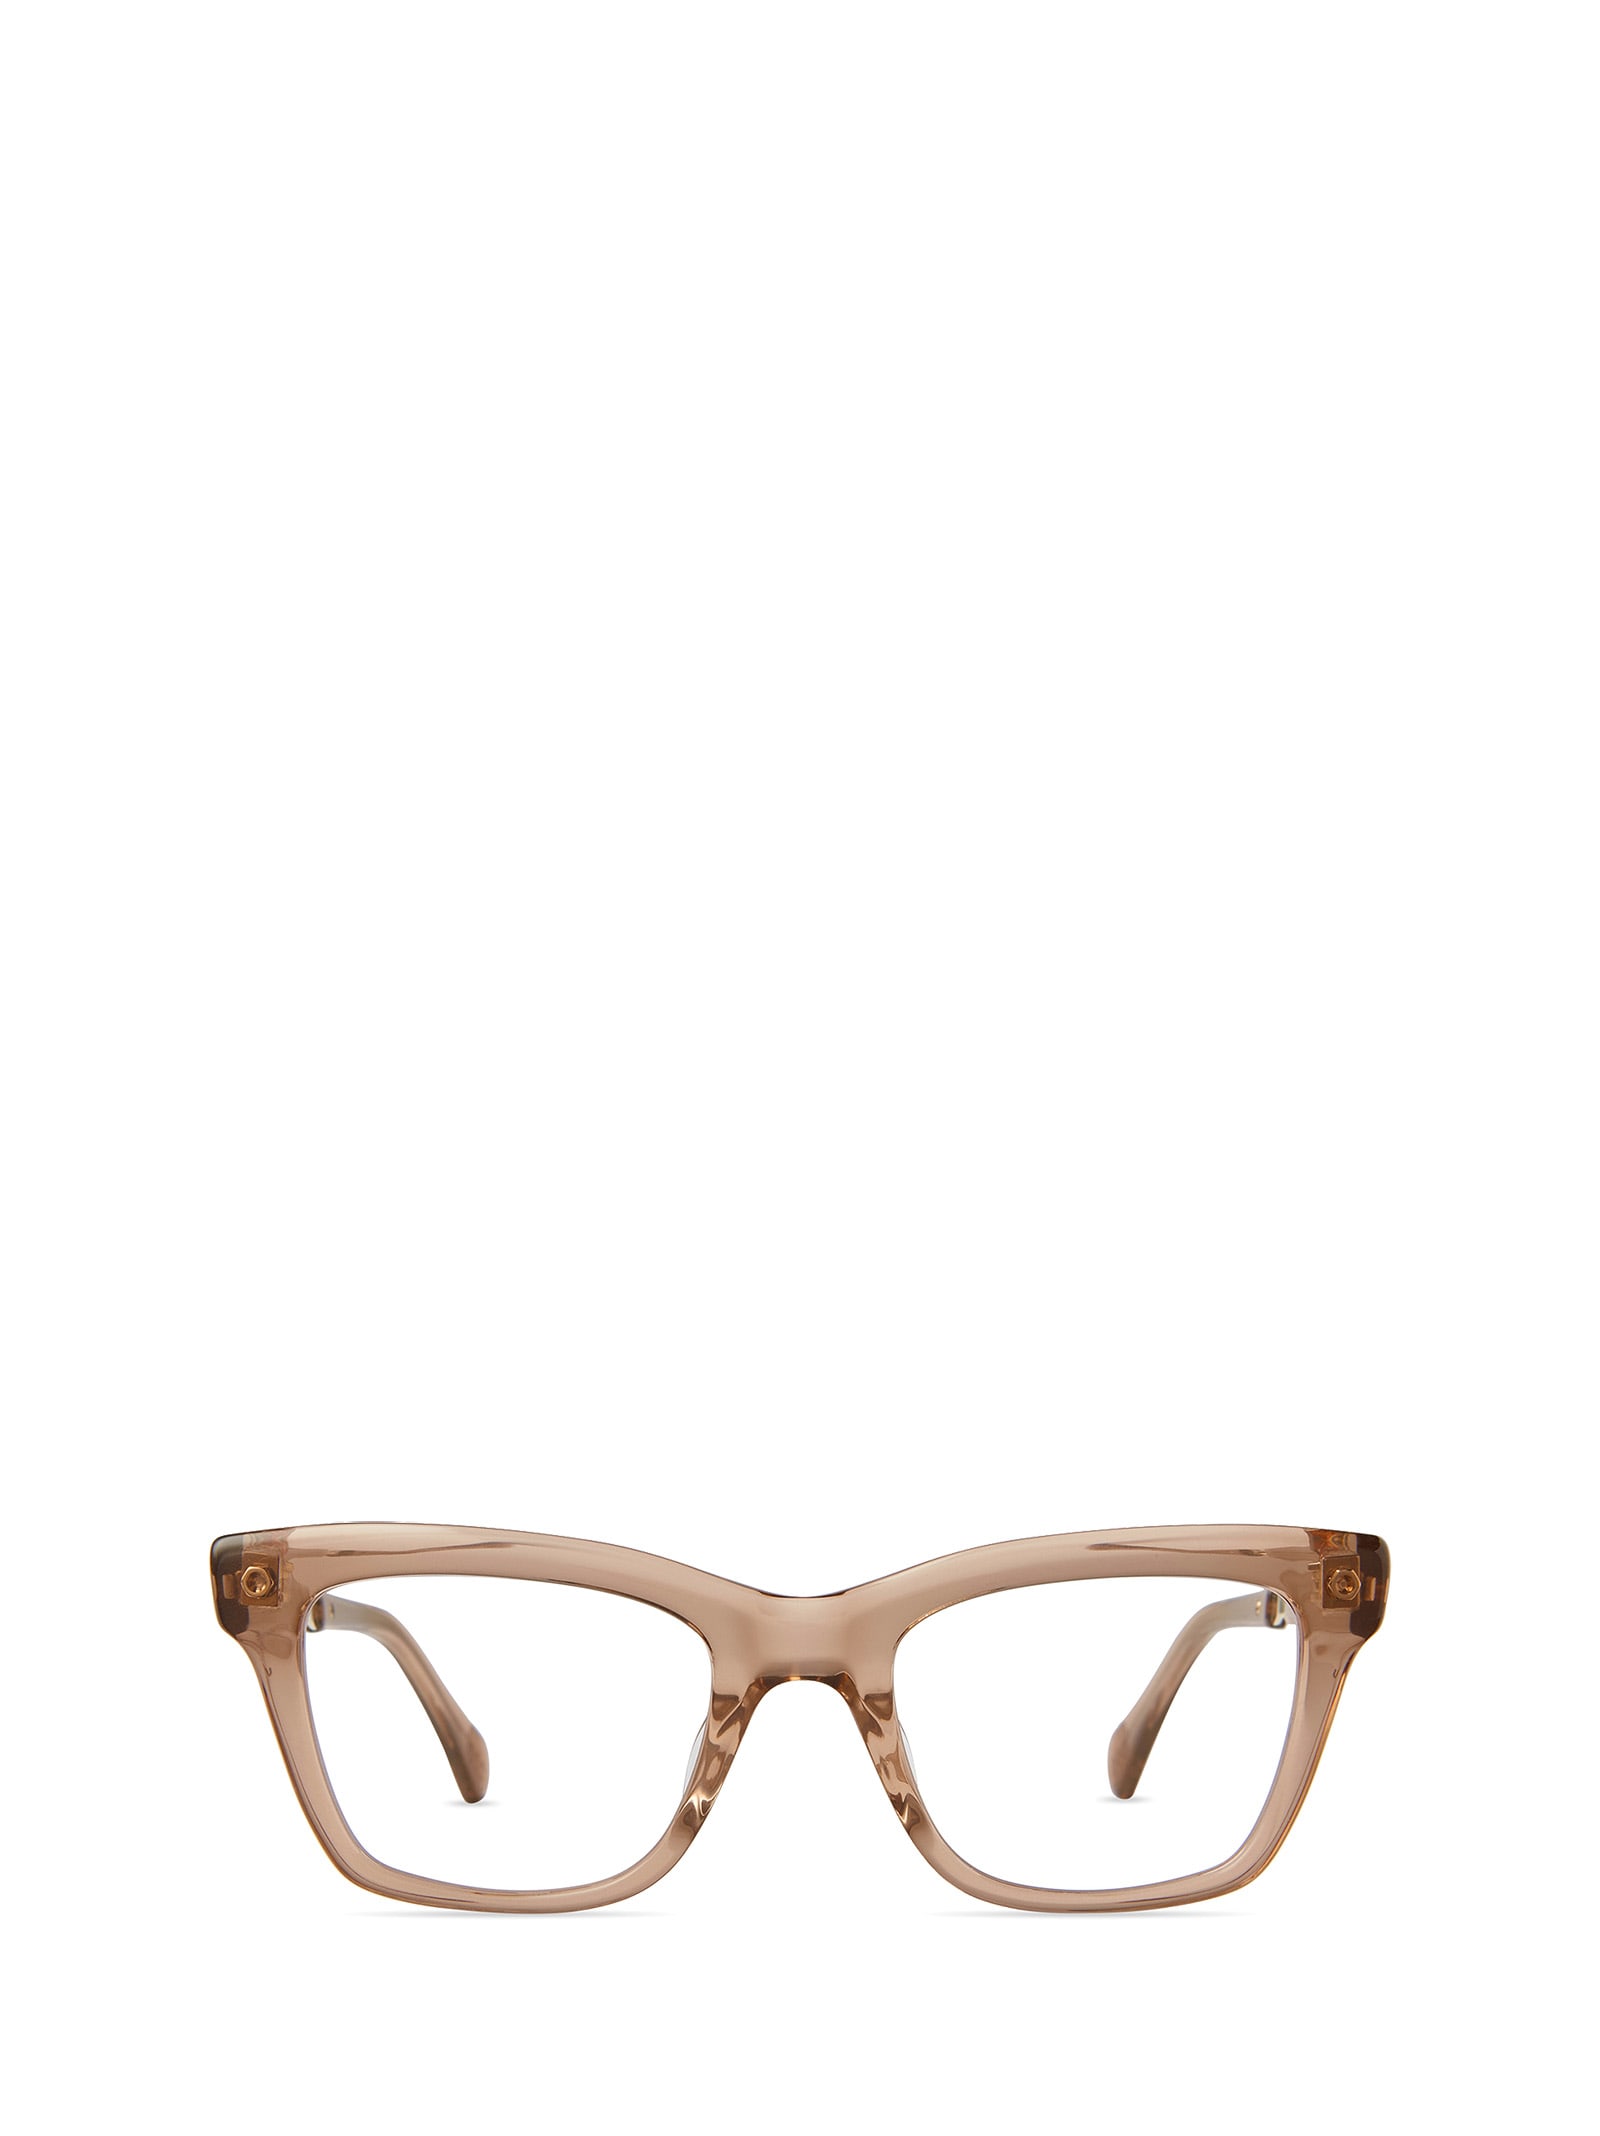 Mr Leight Lolita C Coral Crystal-white Gold Glasses In Marbled Rye-white Gold